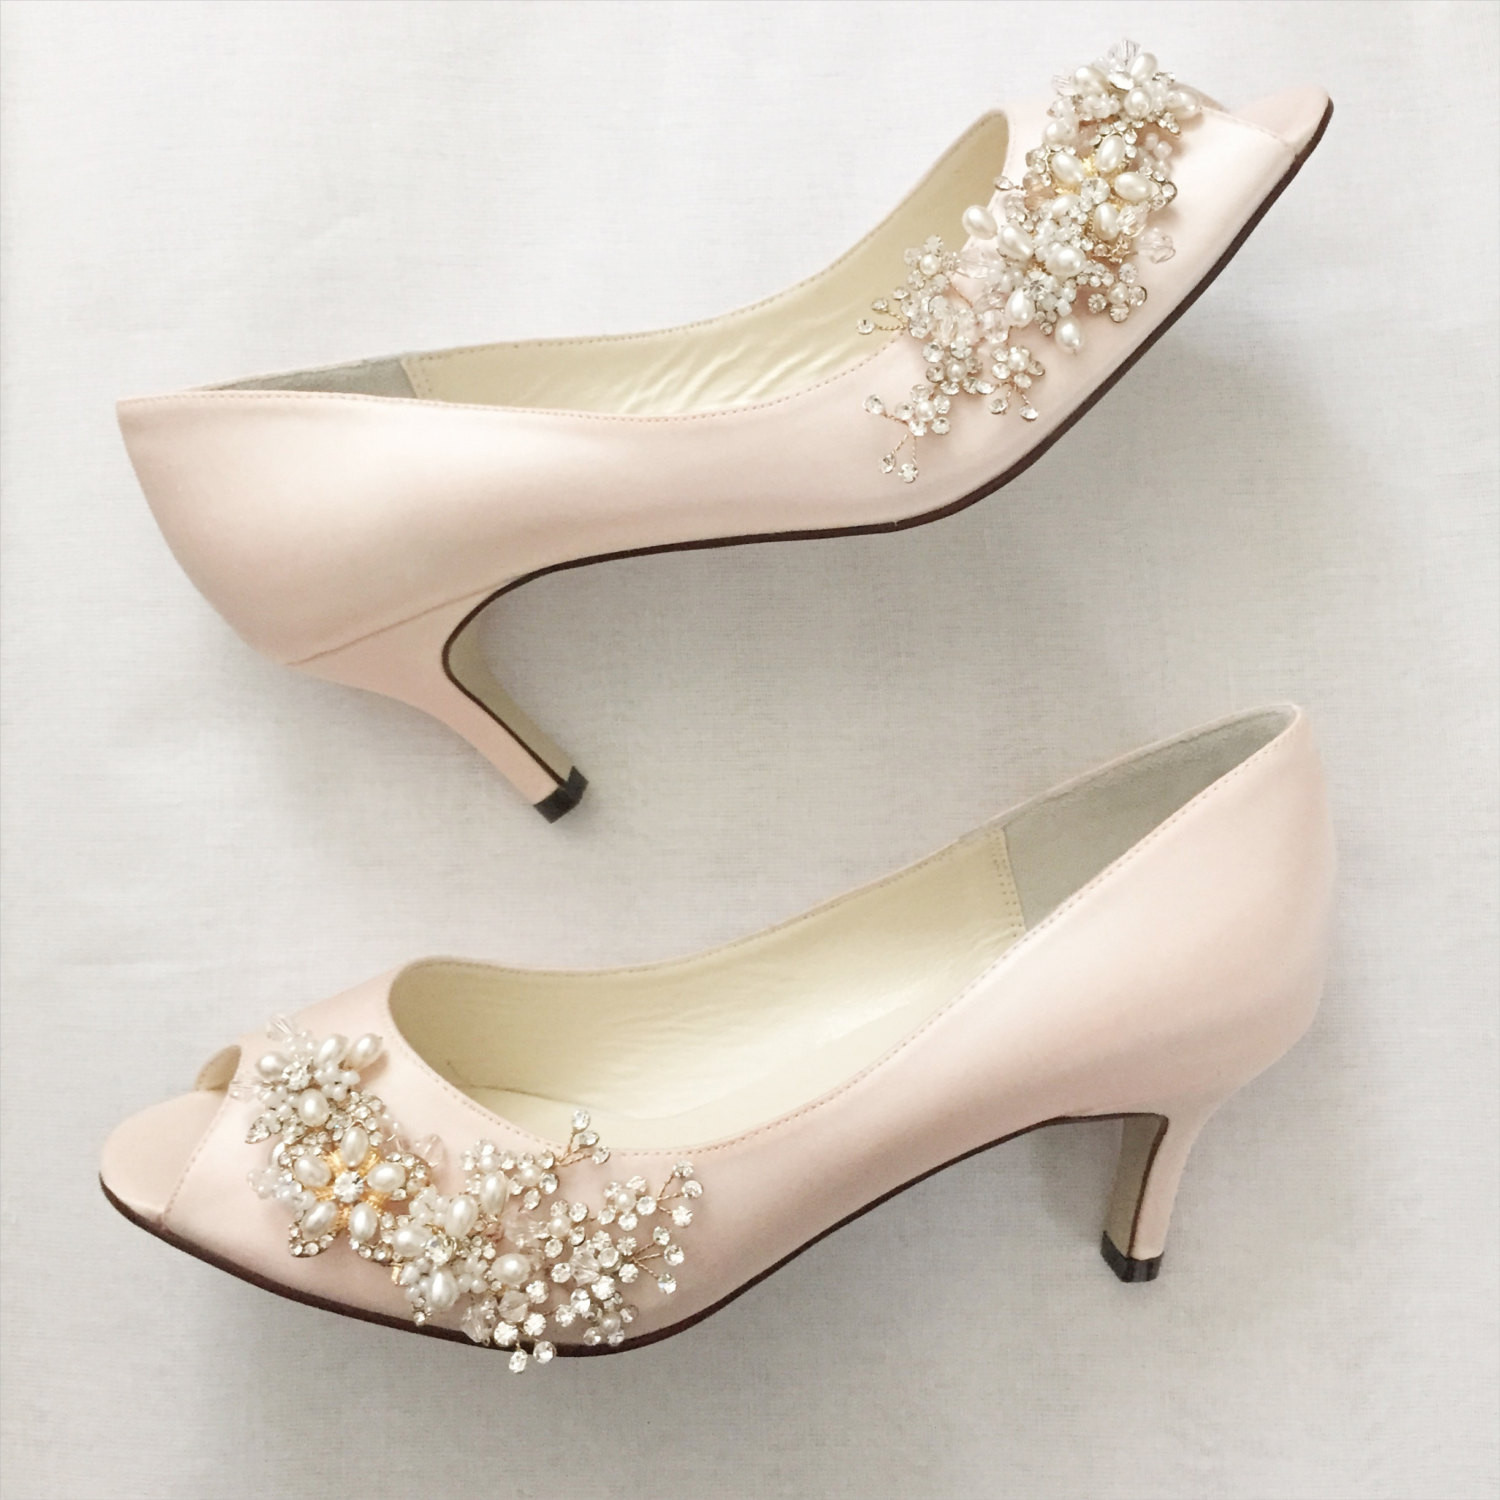 Gold Dress Shoes For Wedding
 Blush Gold Wedding Shoes with Pearl and Crystal Vine Flower